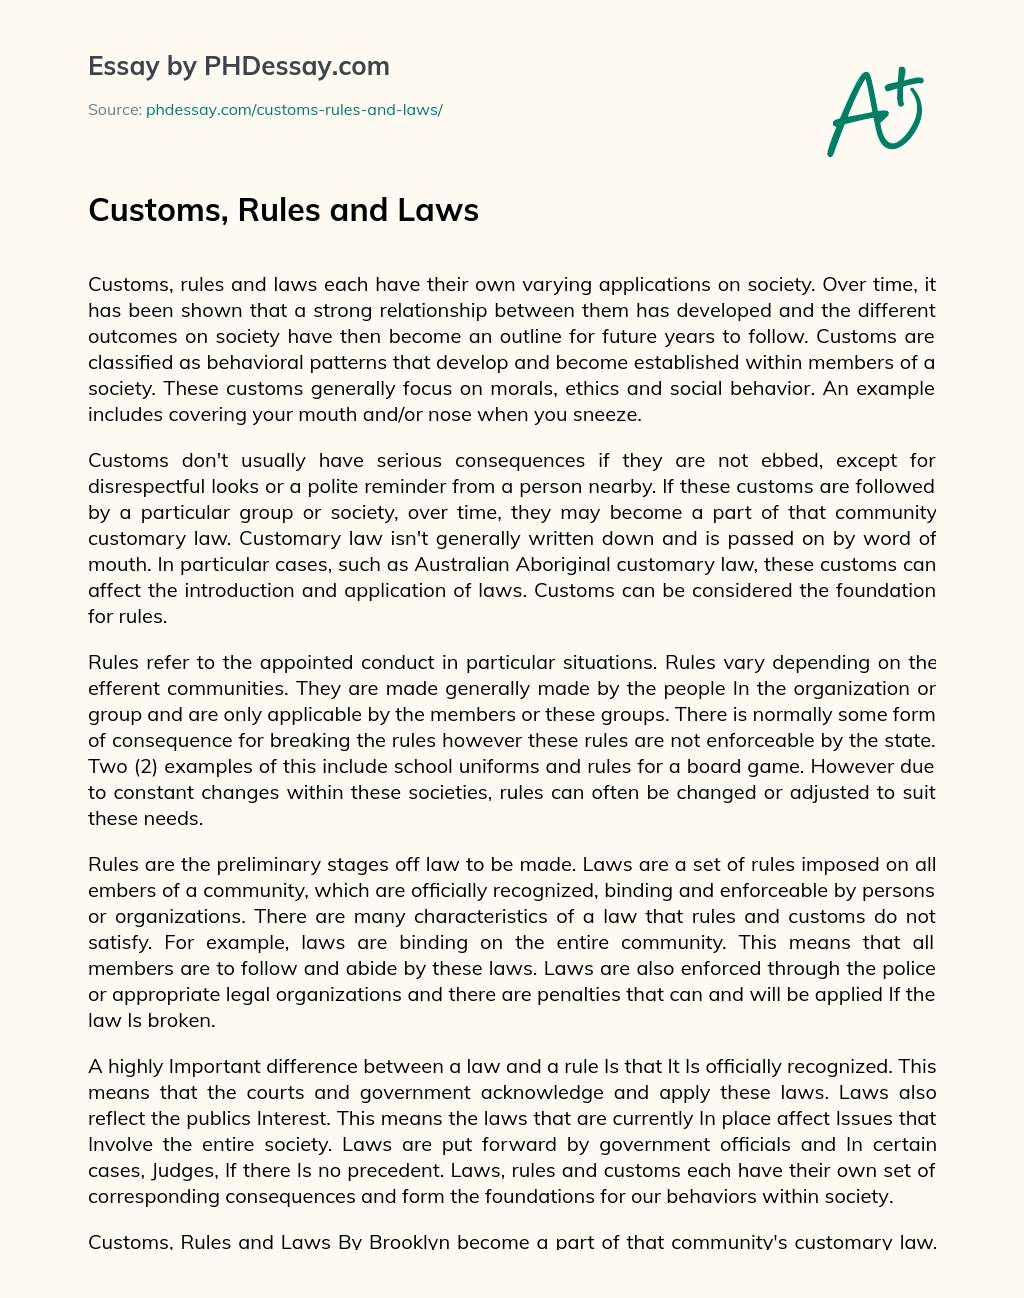 Customs, Rules and Laws essay